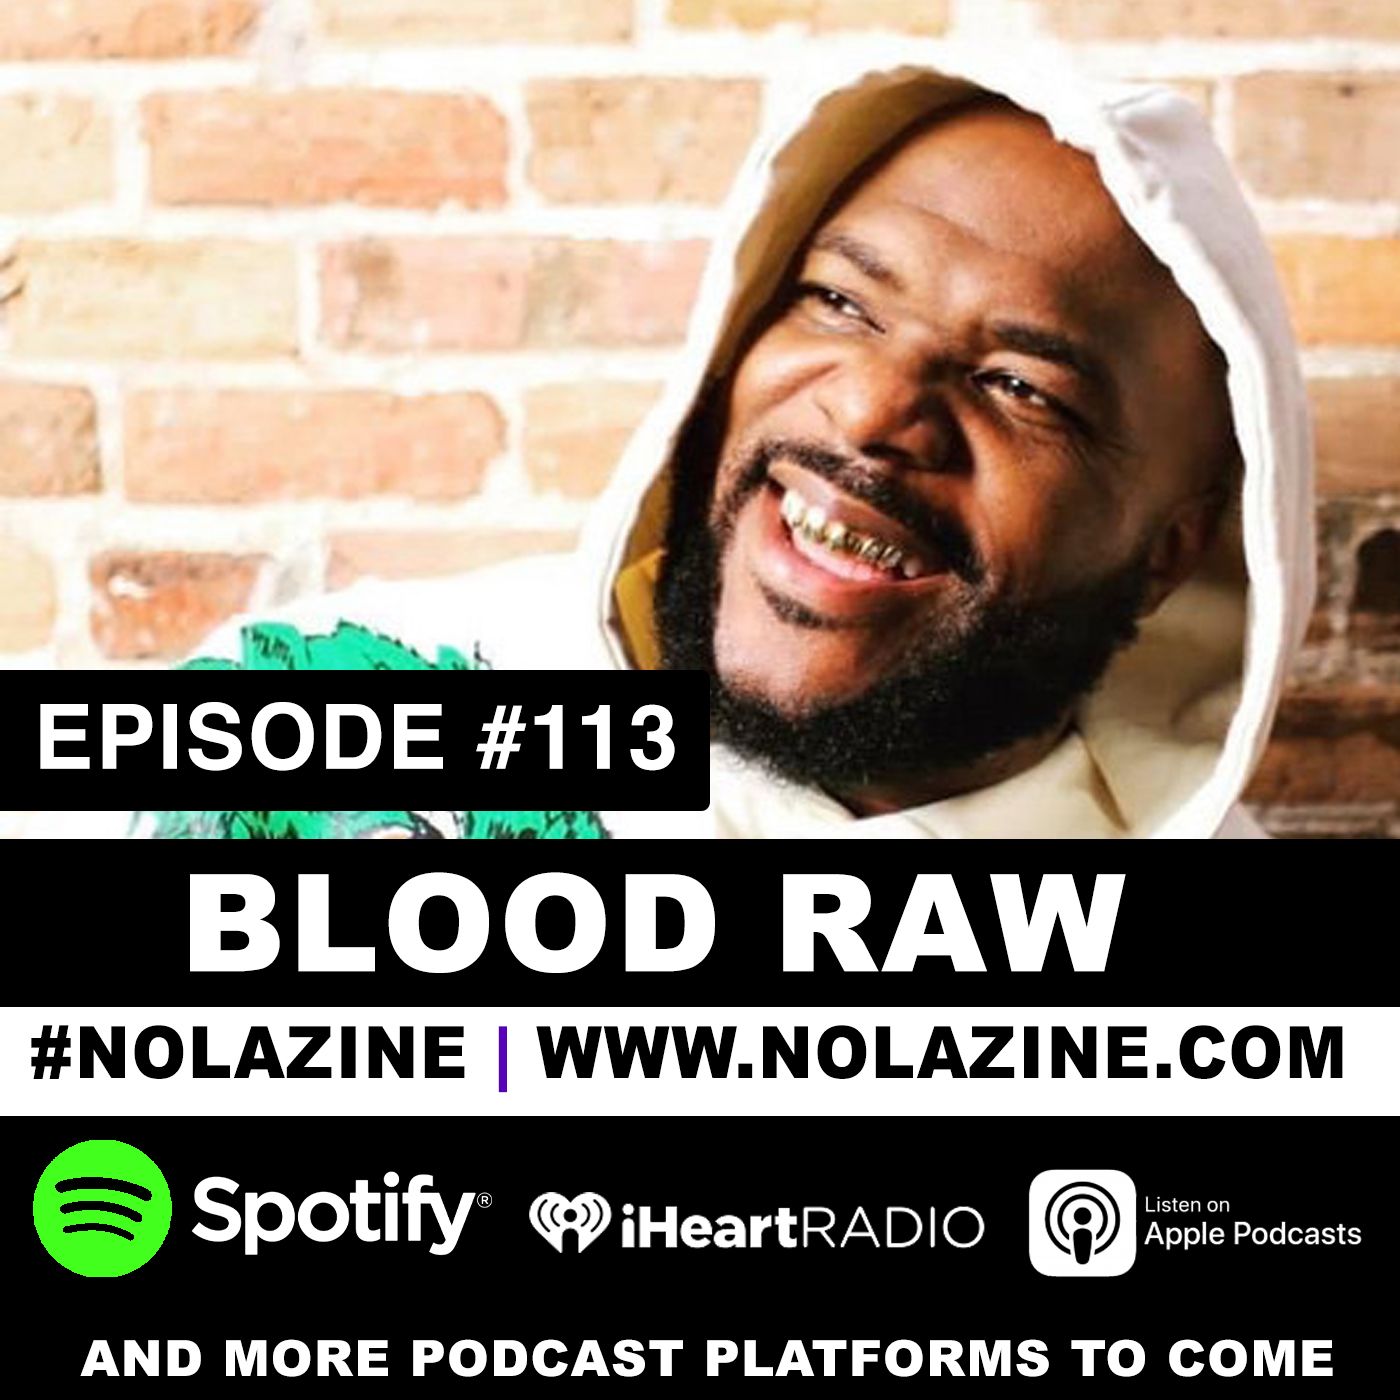 EP: 113 Featuring Blood Raw